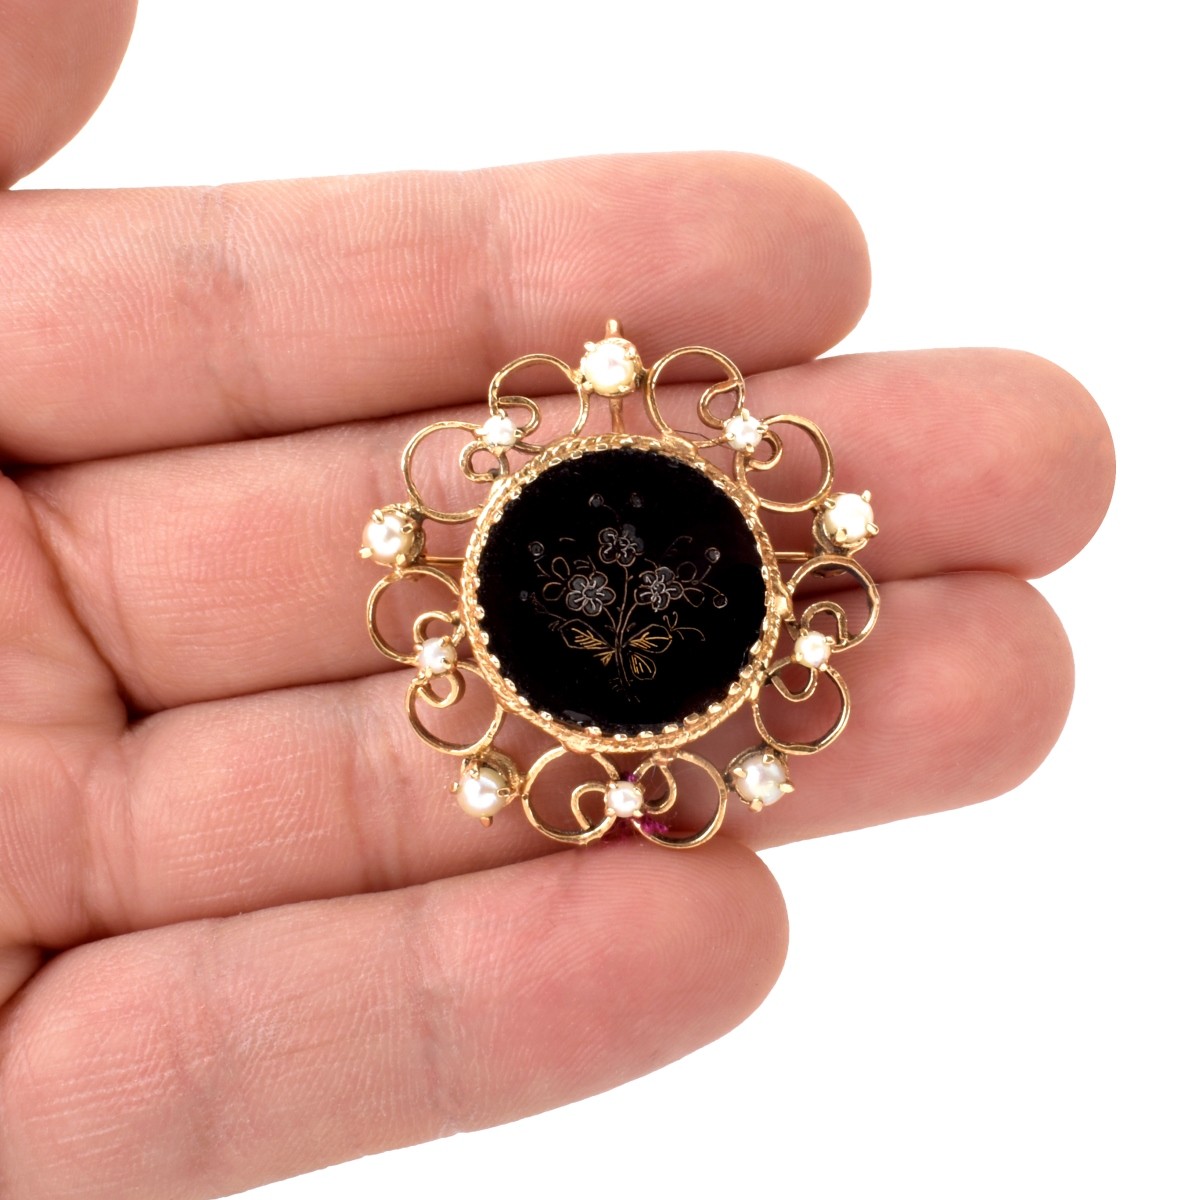 14K, Onyx and Pearl Pendant/Brooch